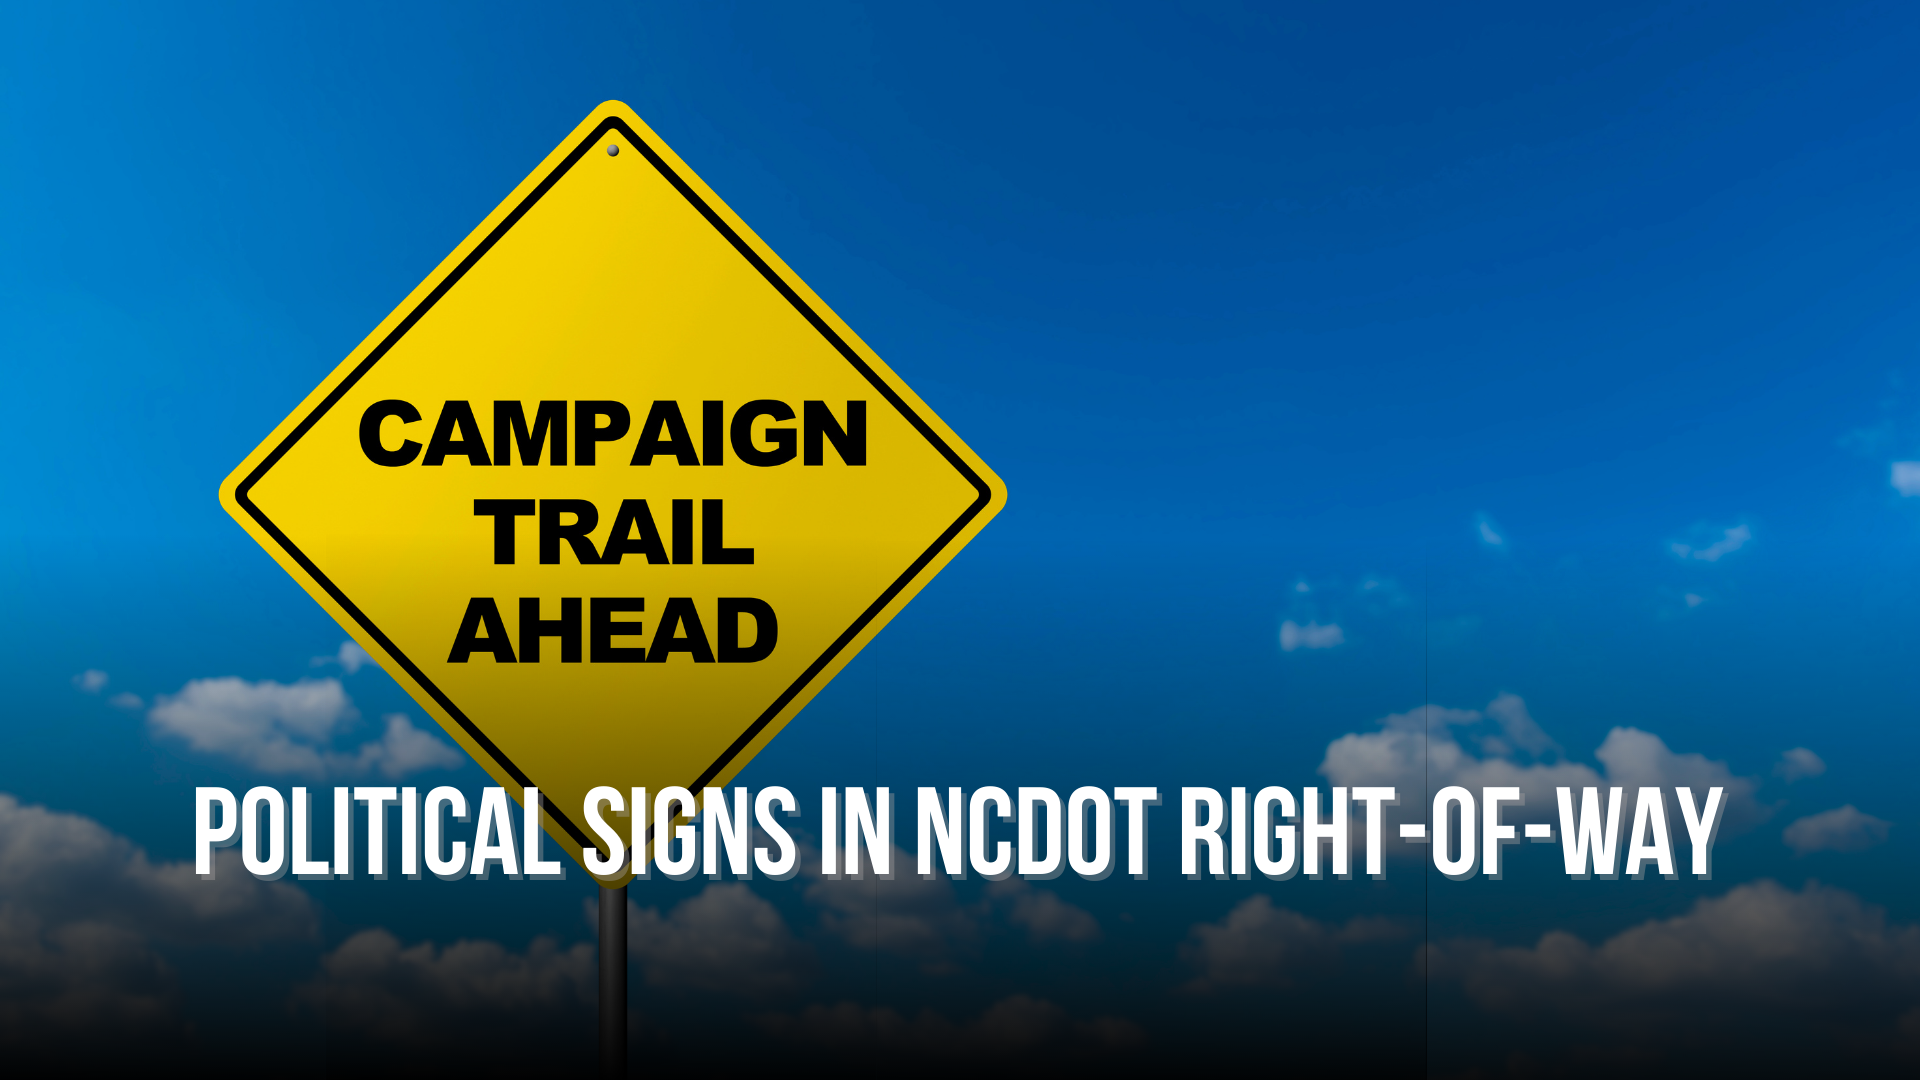 Where political signs are permitted via NCDOT RightofWay